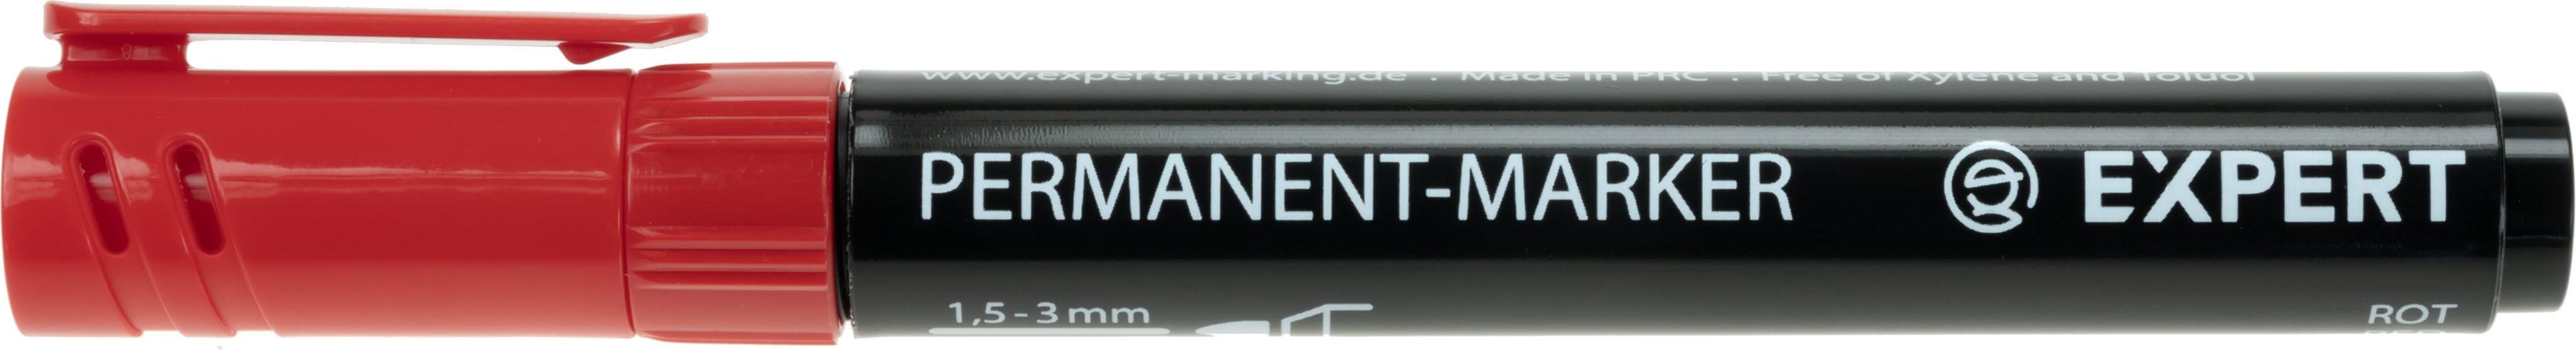 EXPERT Permanent marker round red